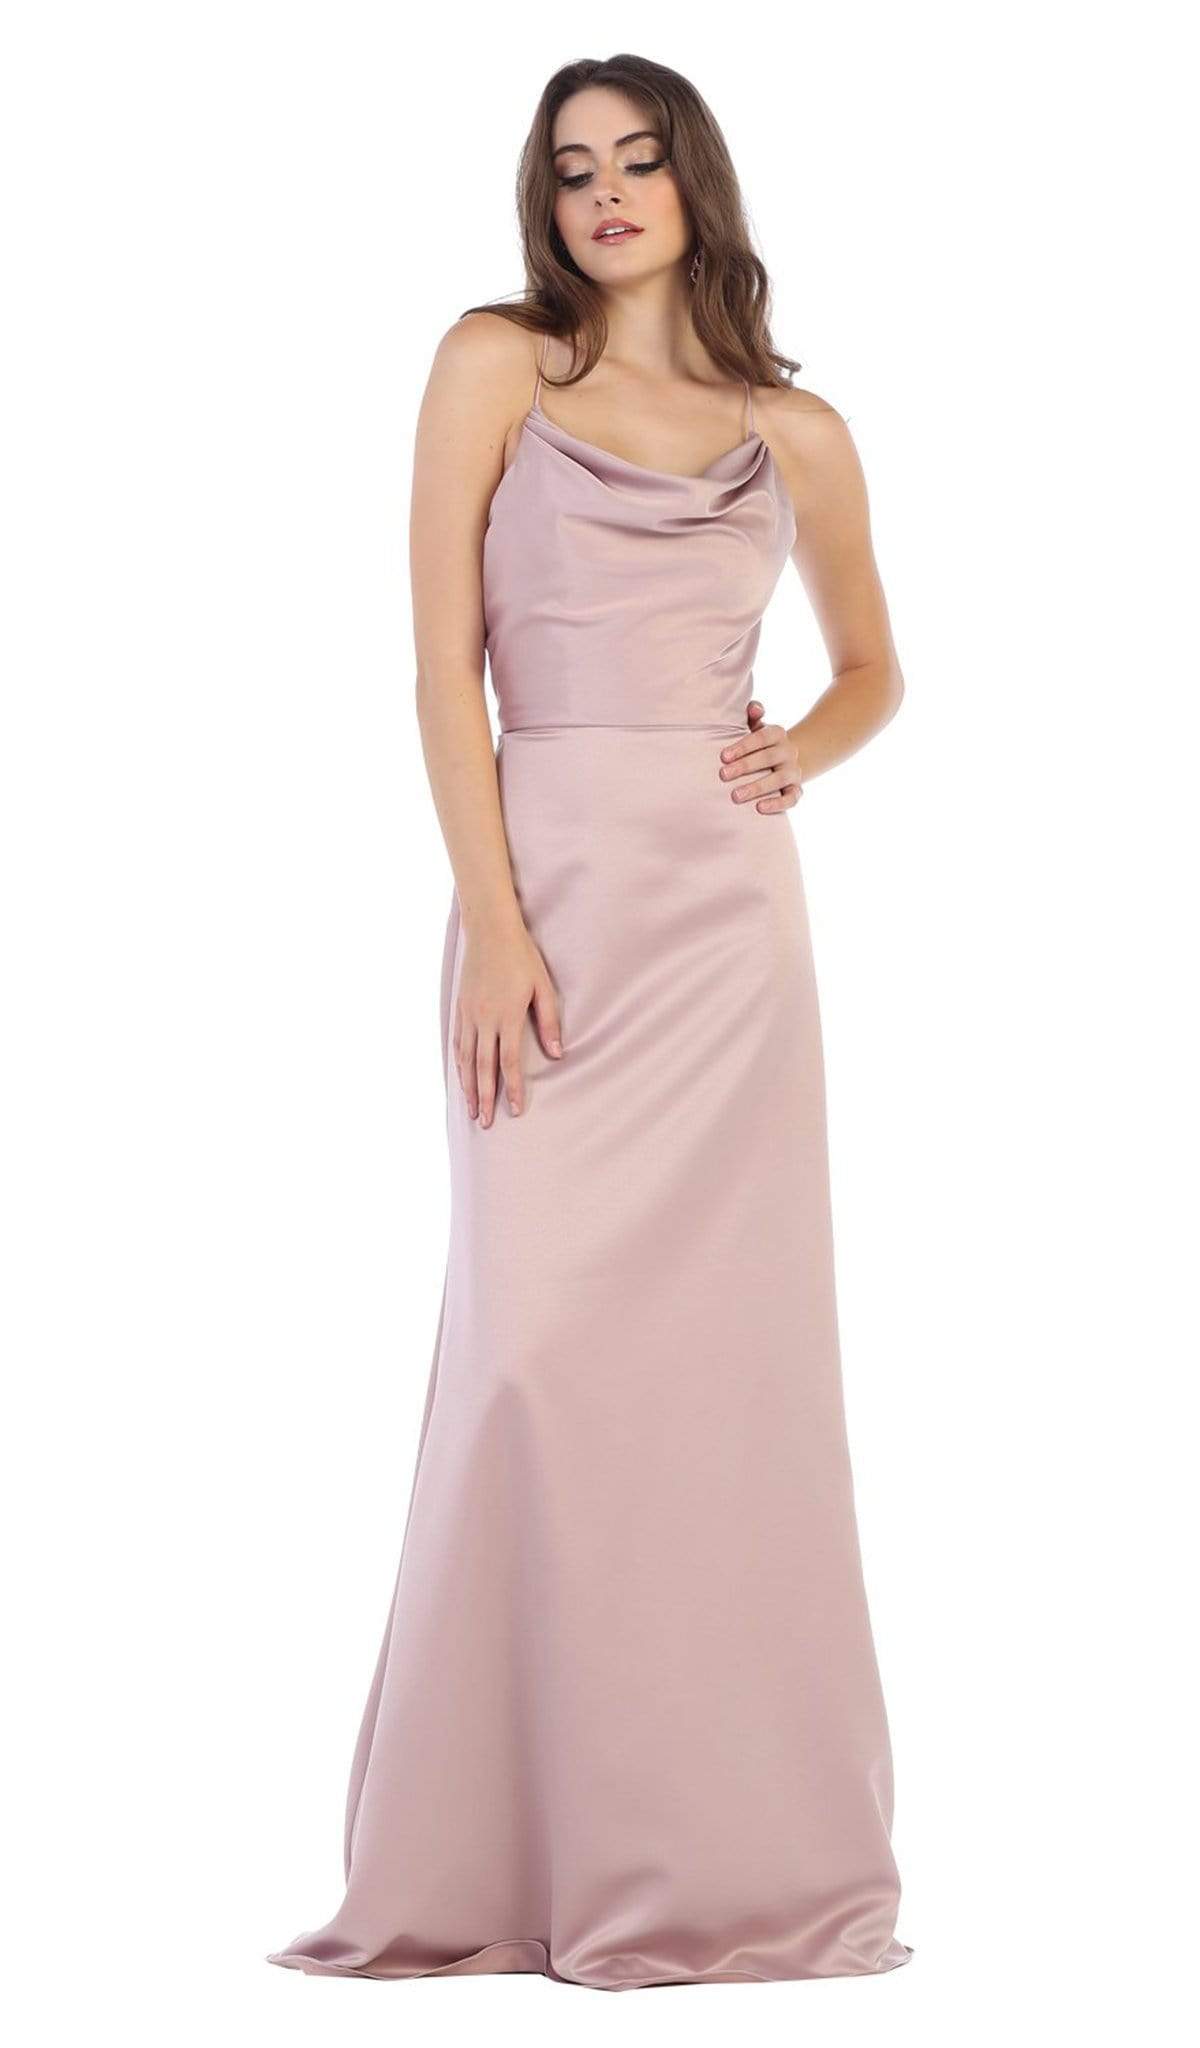 May Queen - MQ1594 Halter Neck Strappy Back Satin A-Line Gown Special Occasion Dress 2 / Mauve